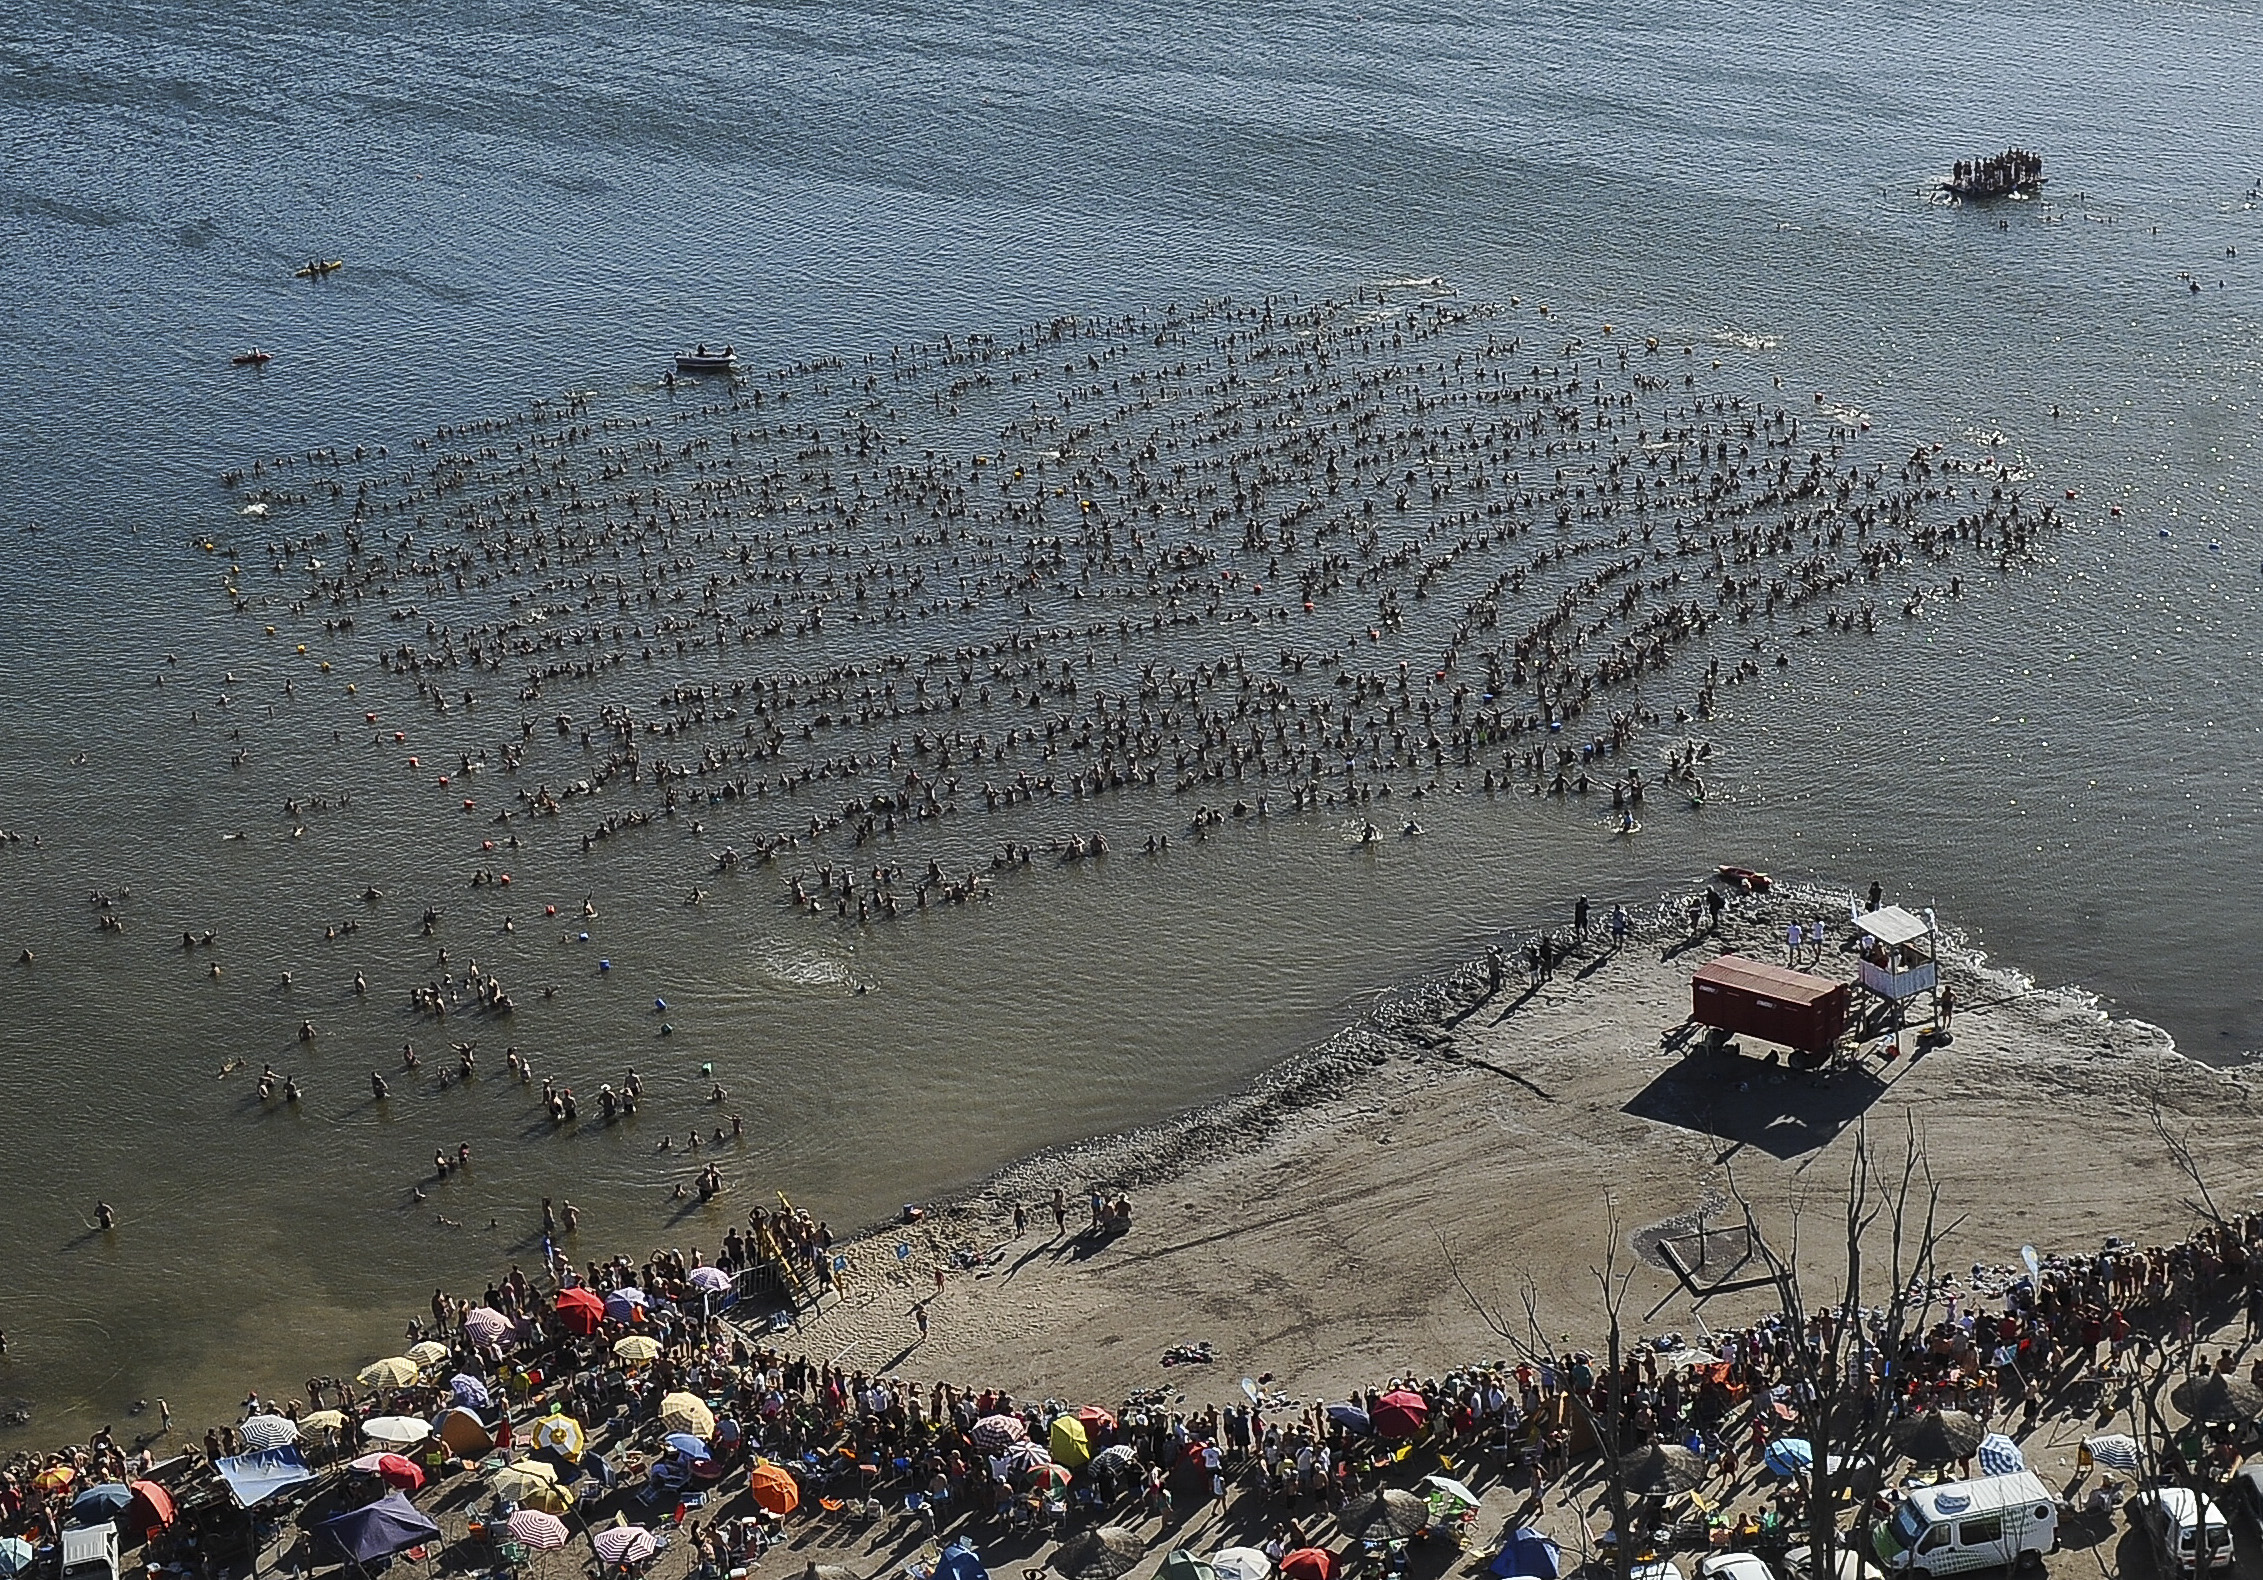 Photo released by Telam on January 29, 2017 showing some 2.000 people floating at Epecuen lake in Carhue, Argentina, during an attemp to break the Guinness World Record and surpass the mark achieved by the Taiwanese, who in 2014 reached the number of 643 people floating at the same time. / AFP PHOTO / TELAM / Paula RIBAS / RESTRICTED TO EDITORIAL USE - MANDATORY CREDIT "AFP PHOTO / TELAM / Paula RIBAS /HO " - NO MARKETING - NO ADVERTISING CAMPAIGNS - DISTRIBUTED AS A SERVICE TO CLIENTS